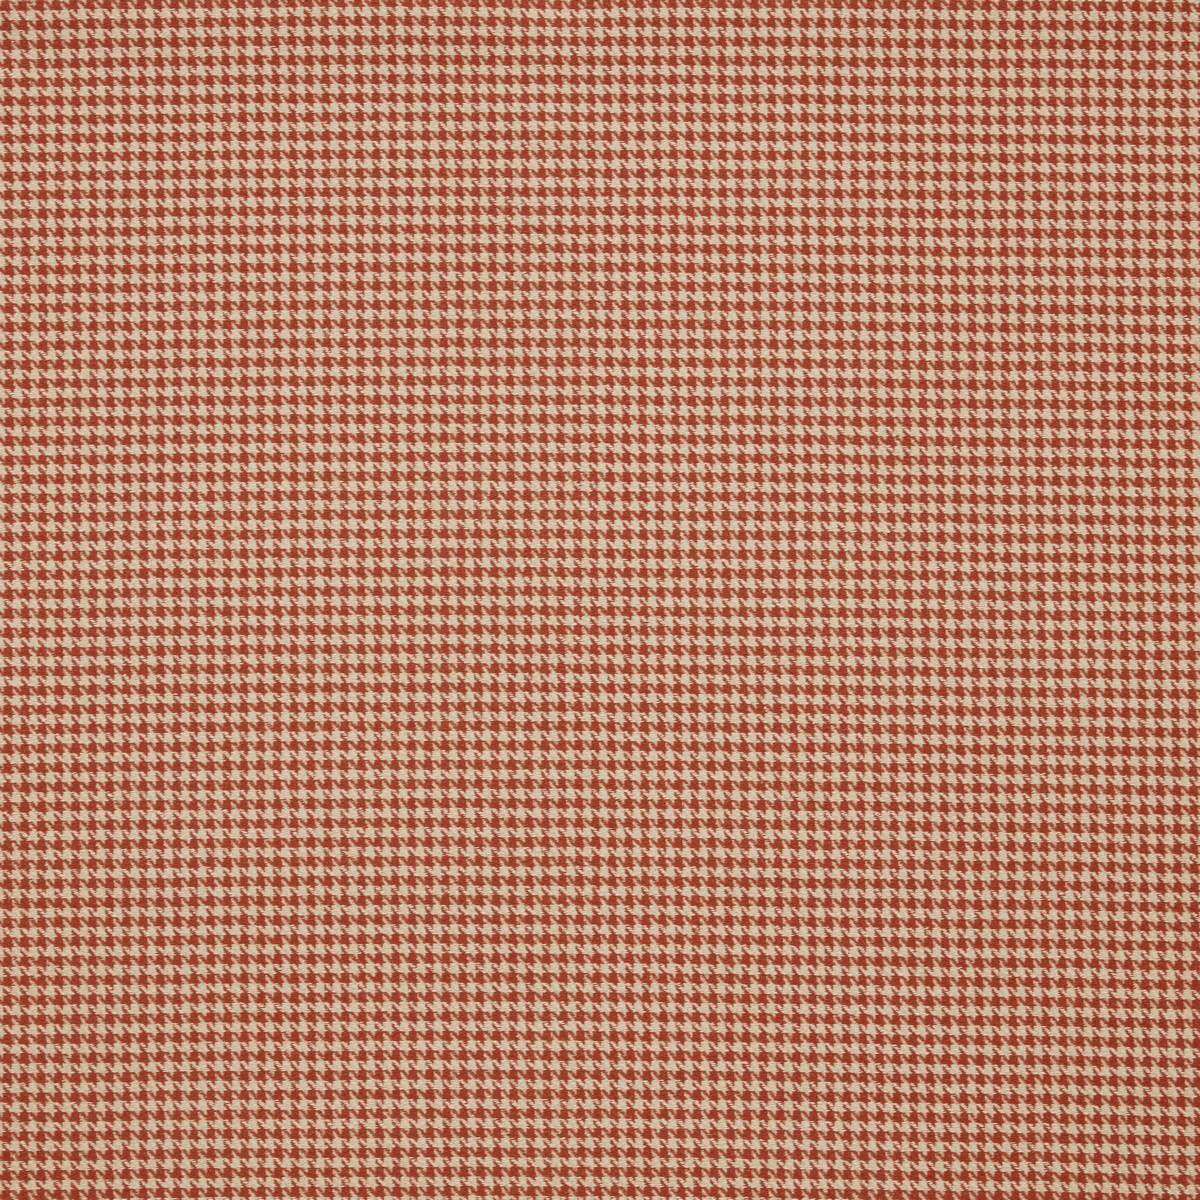 Houndstooth Flame Fabric by iLiv